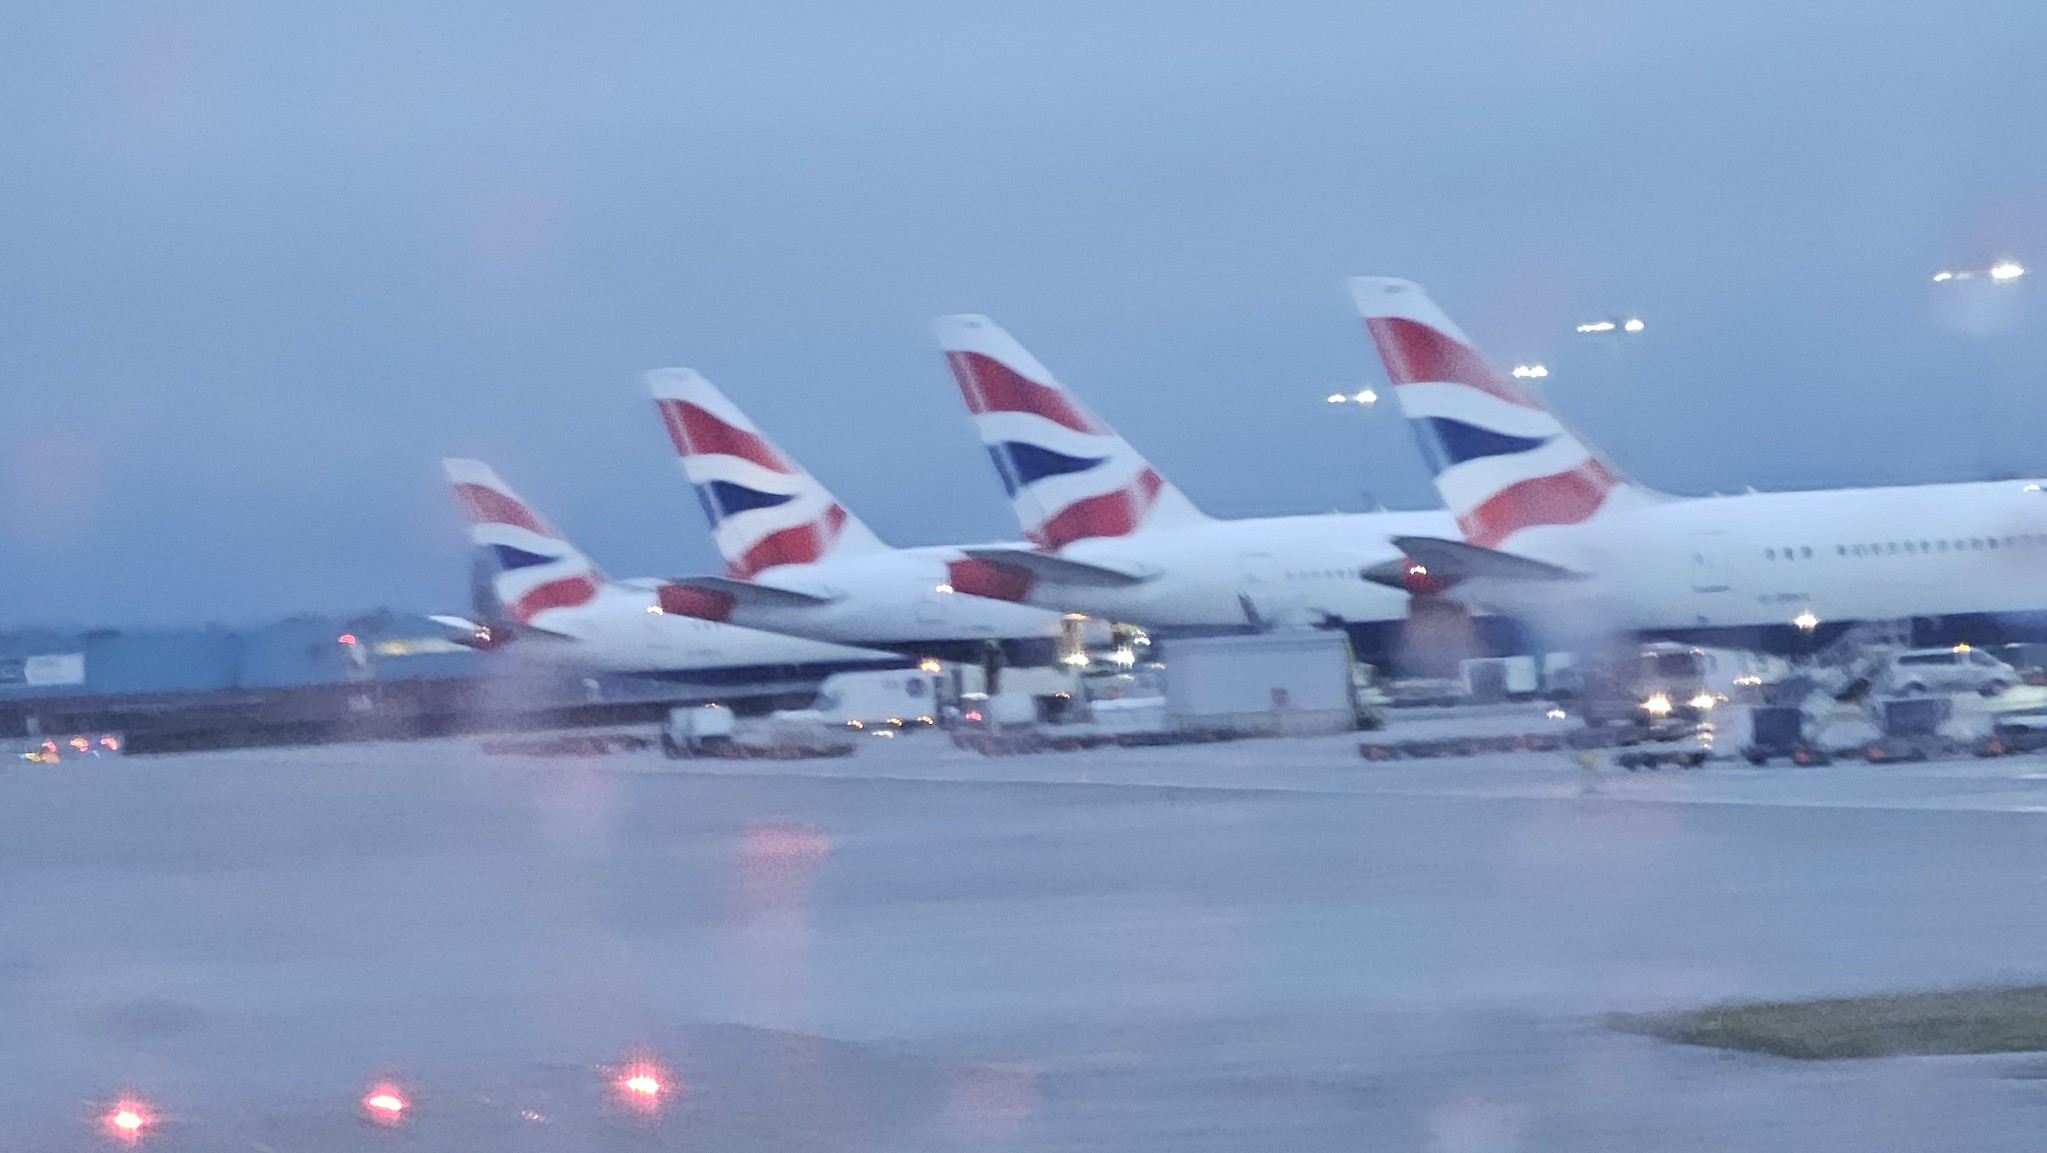 A murky view of BA tails at Heathrow T5